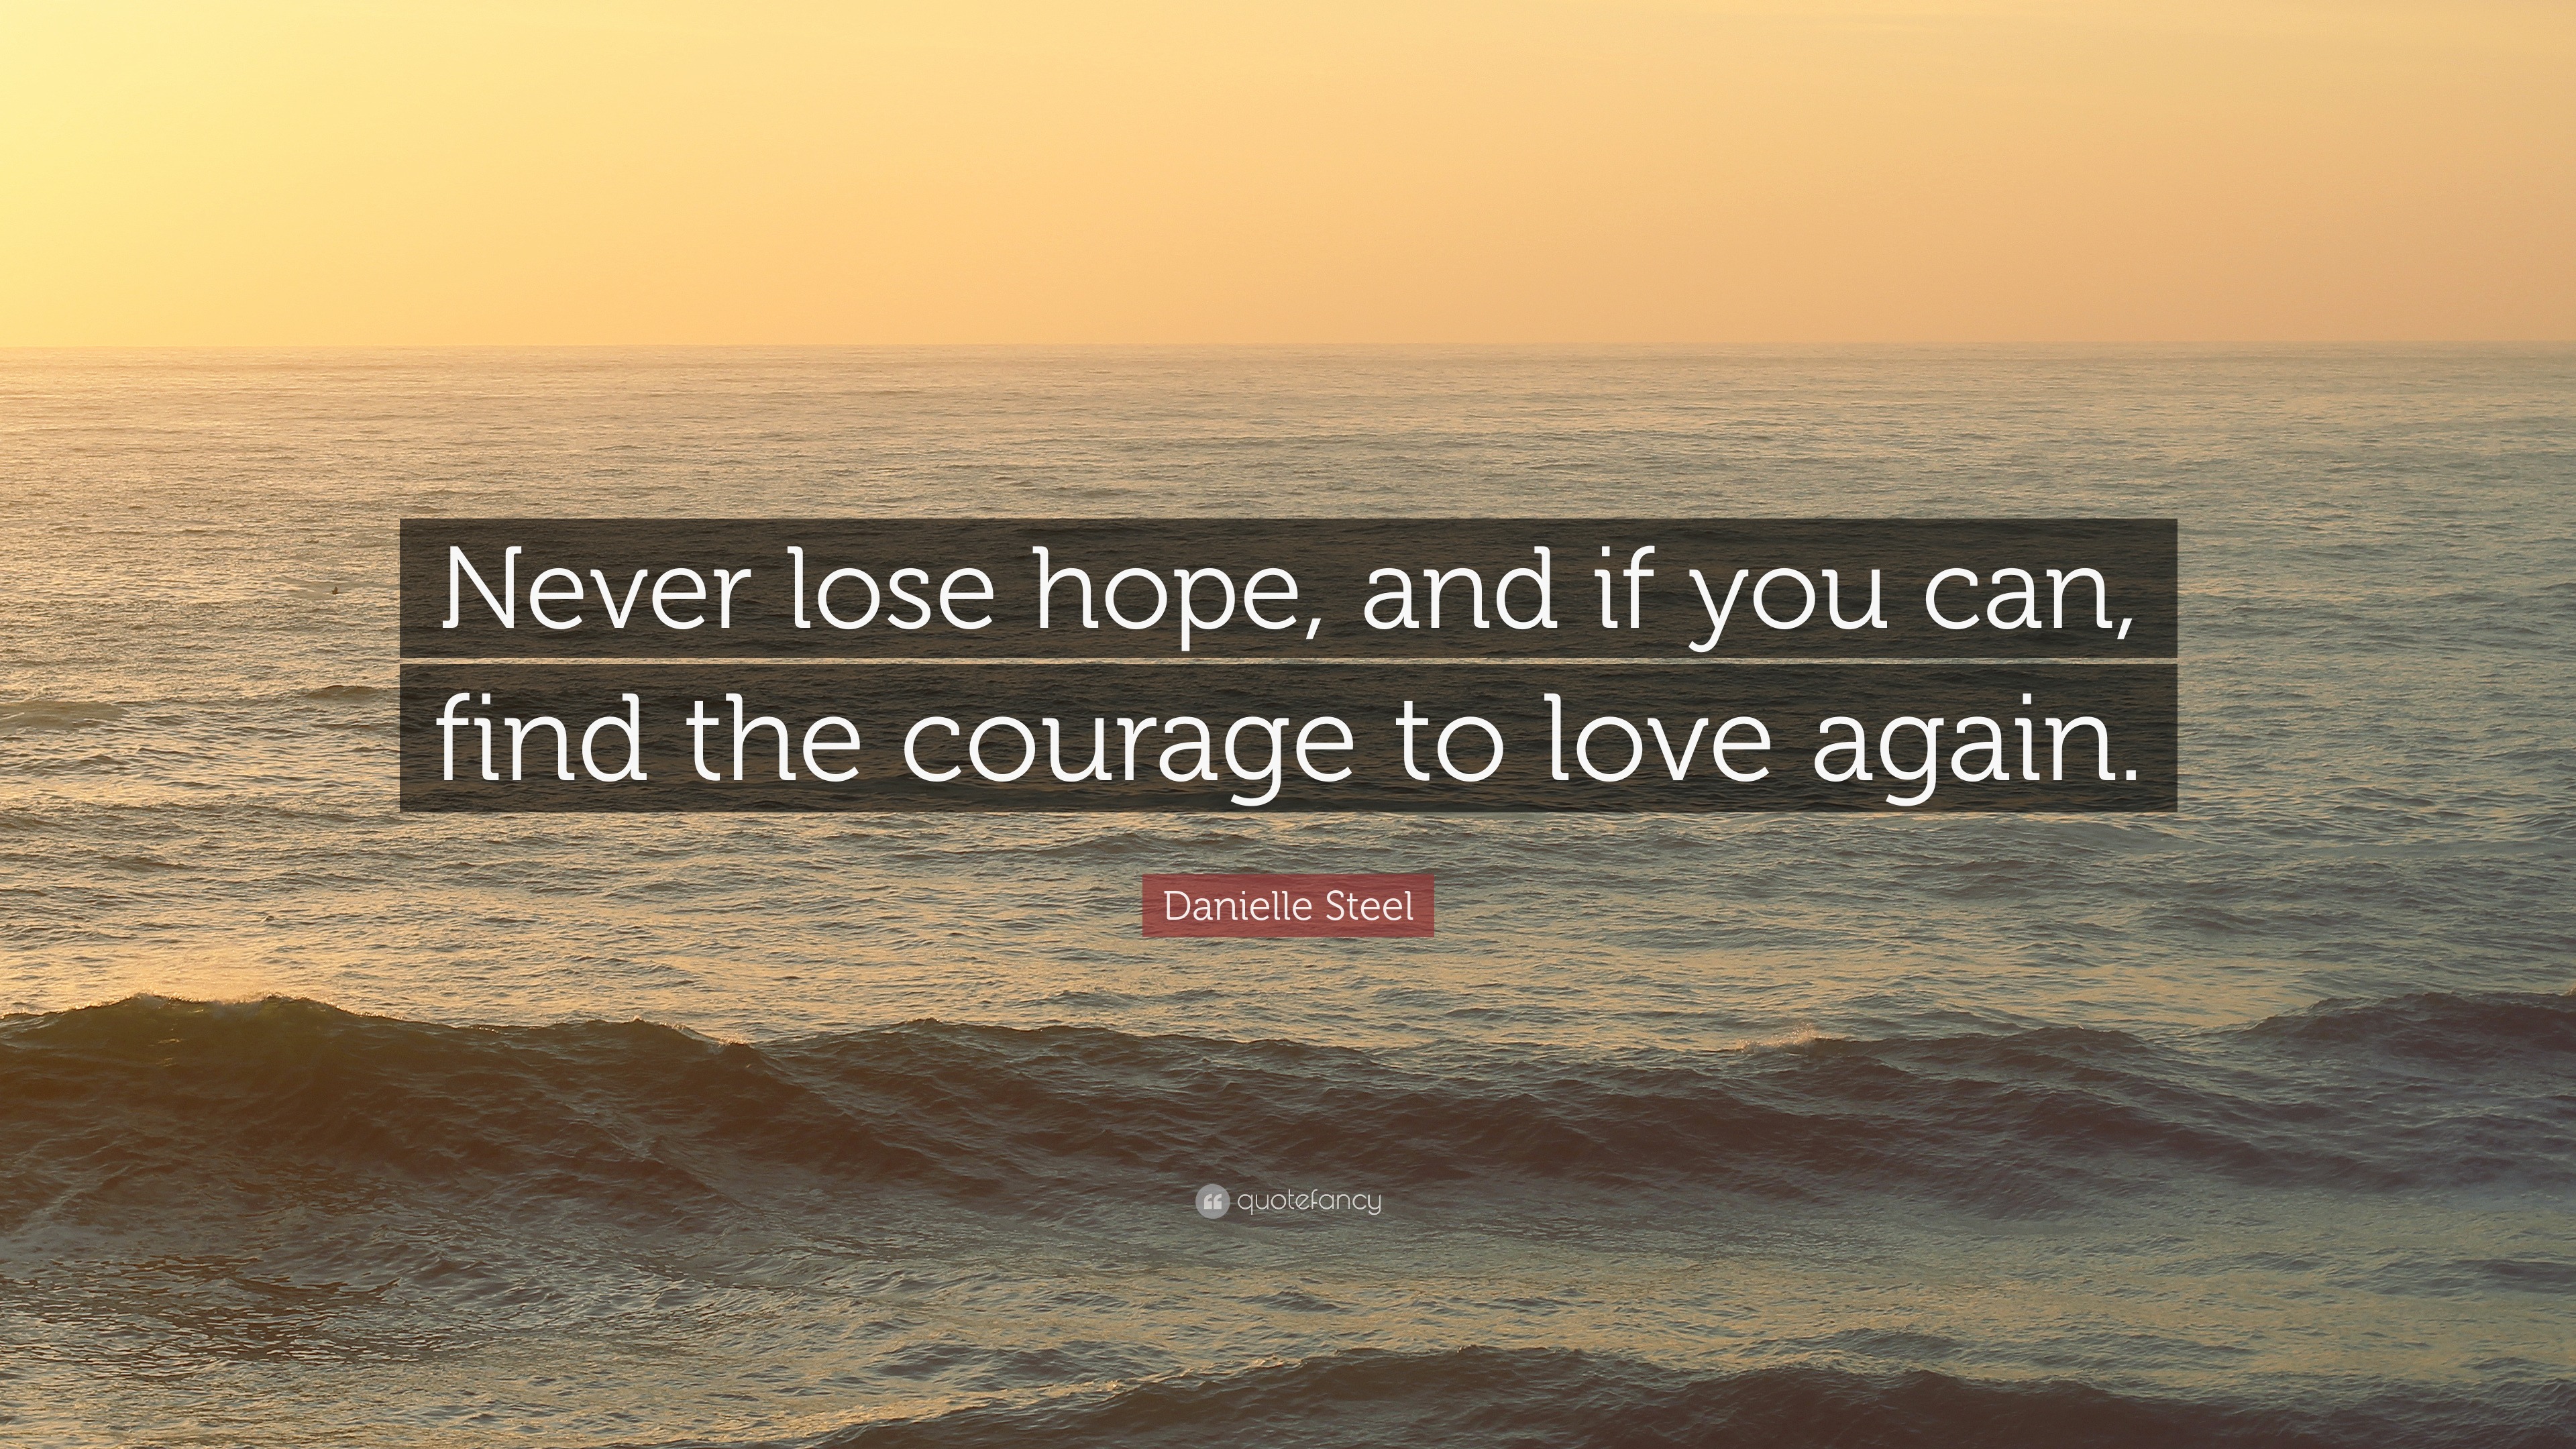 Danielle Steel Quote “Never lose hope and if you can find the